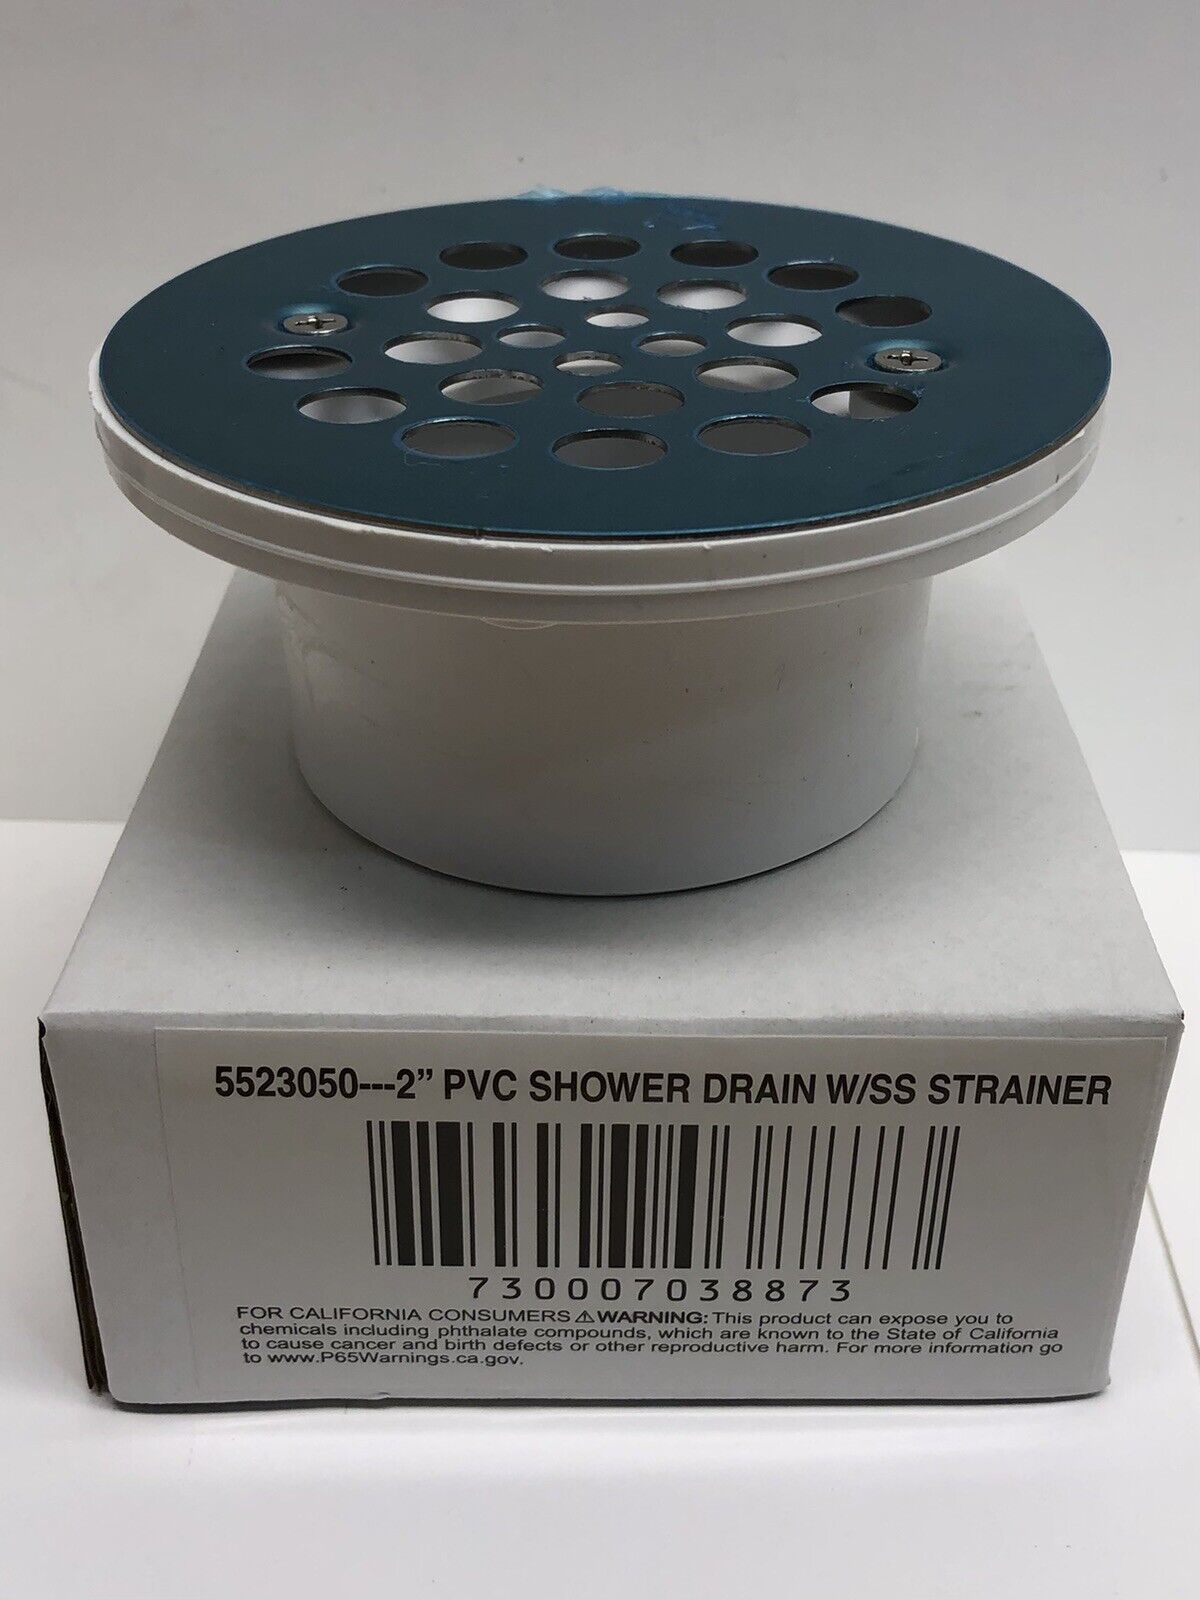 2" Pvc Receptor Base Shower Drain With Stainless Steel 4-1/4" Strainer